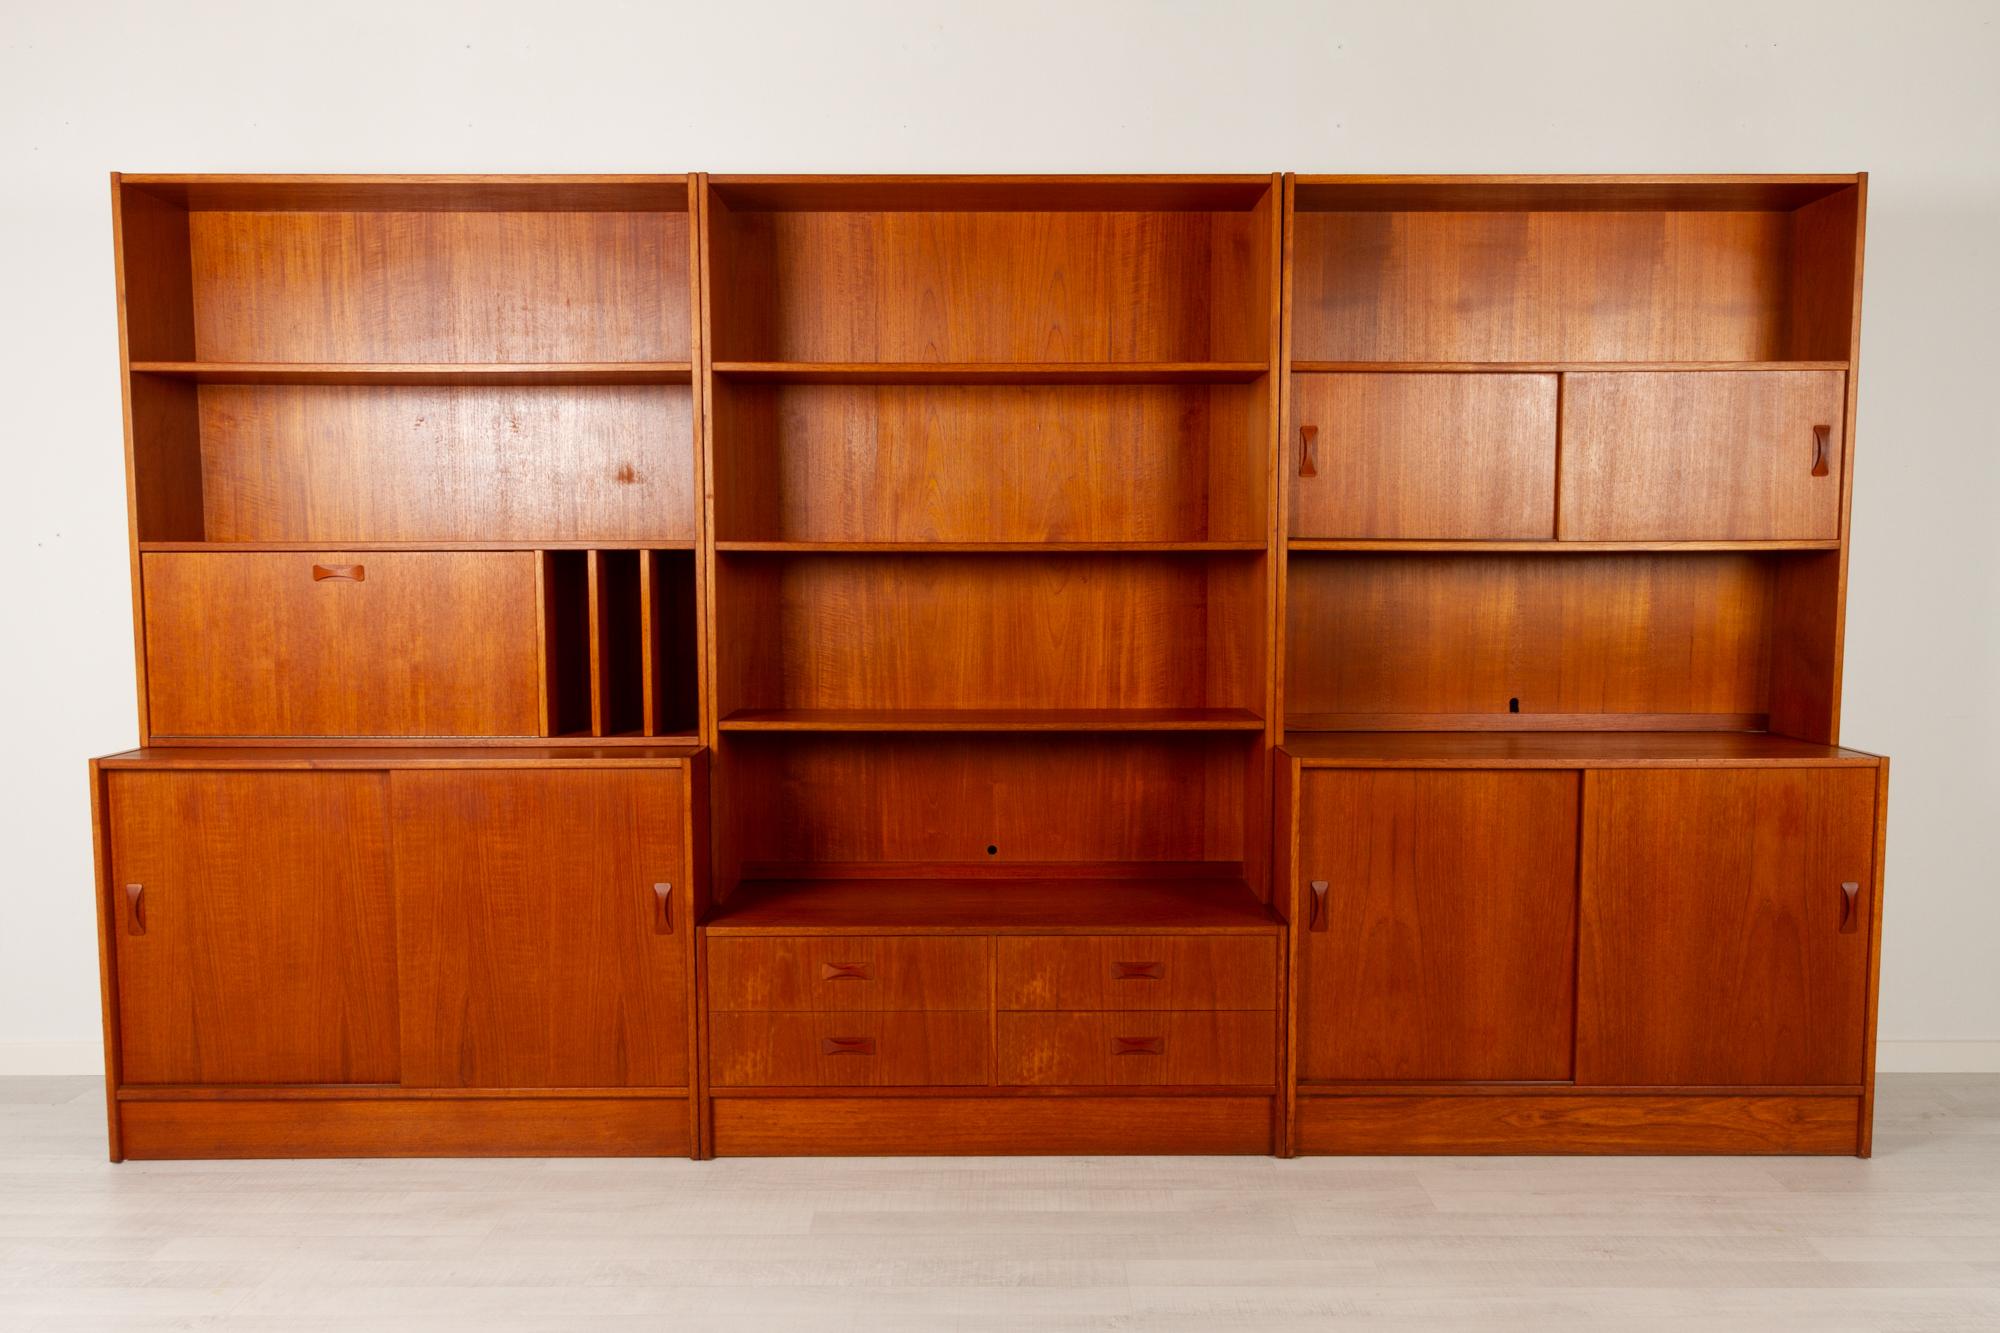 Vintage Danish teak bookcase by Clausen & Søn Silkeborg, 1960s
Large modular bookcase in three sections, each with top and bottom module. Iconic bow tie style pulls on drawers and sliding doors. Contains two large cabinets with sliding doors,